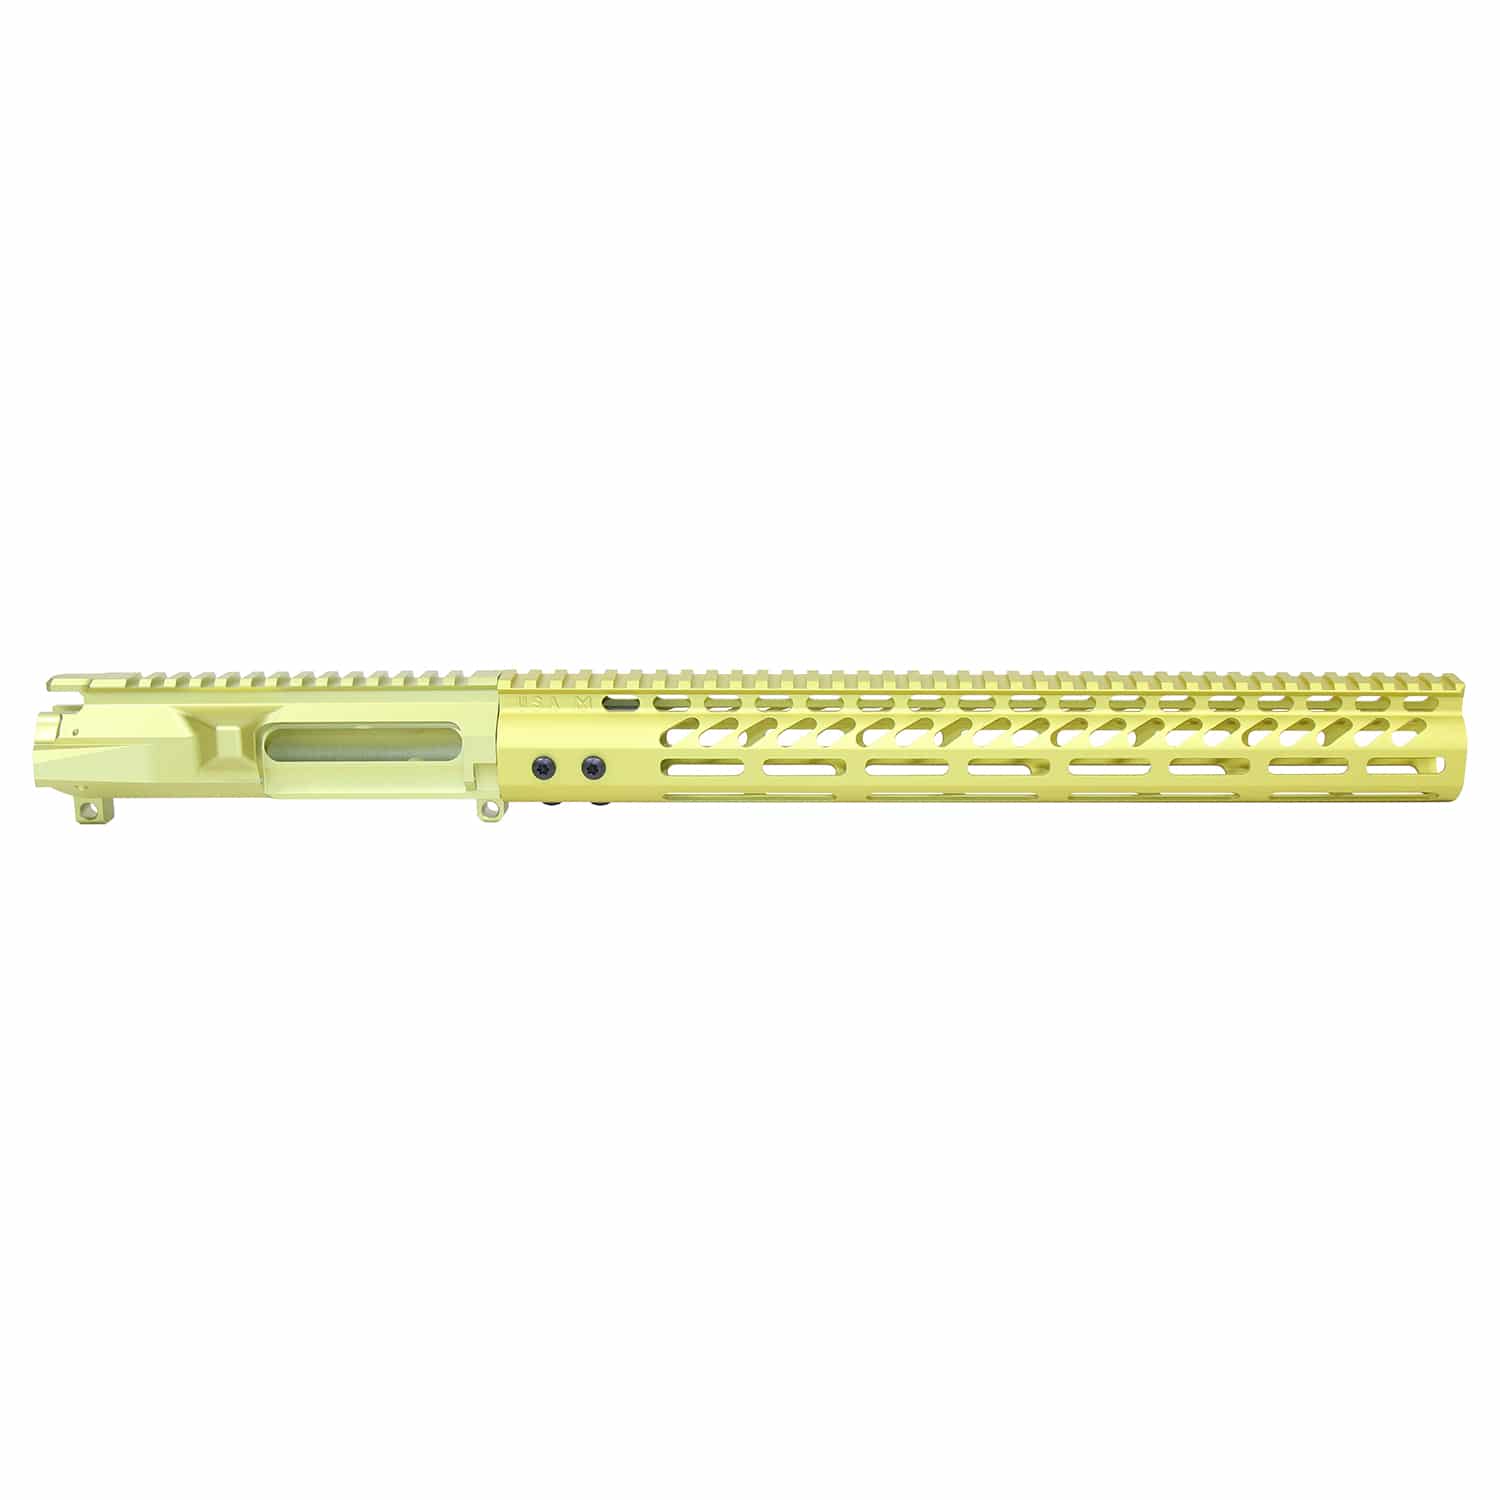 AR-15 Stripped Billet Upper Receiver and 15" M-LOK Handguard Combo Set in Anodized Neon Yellow